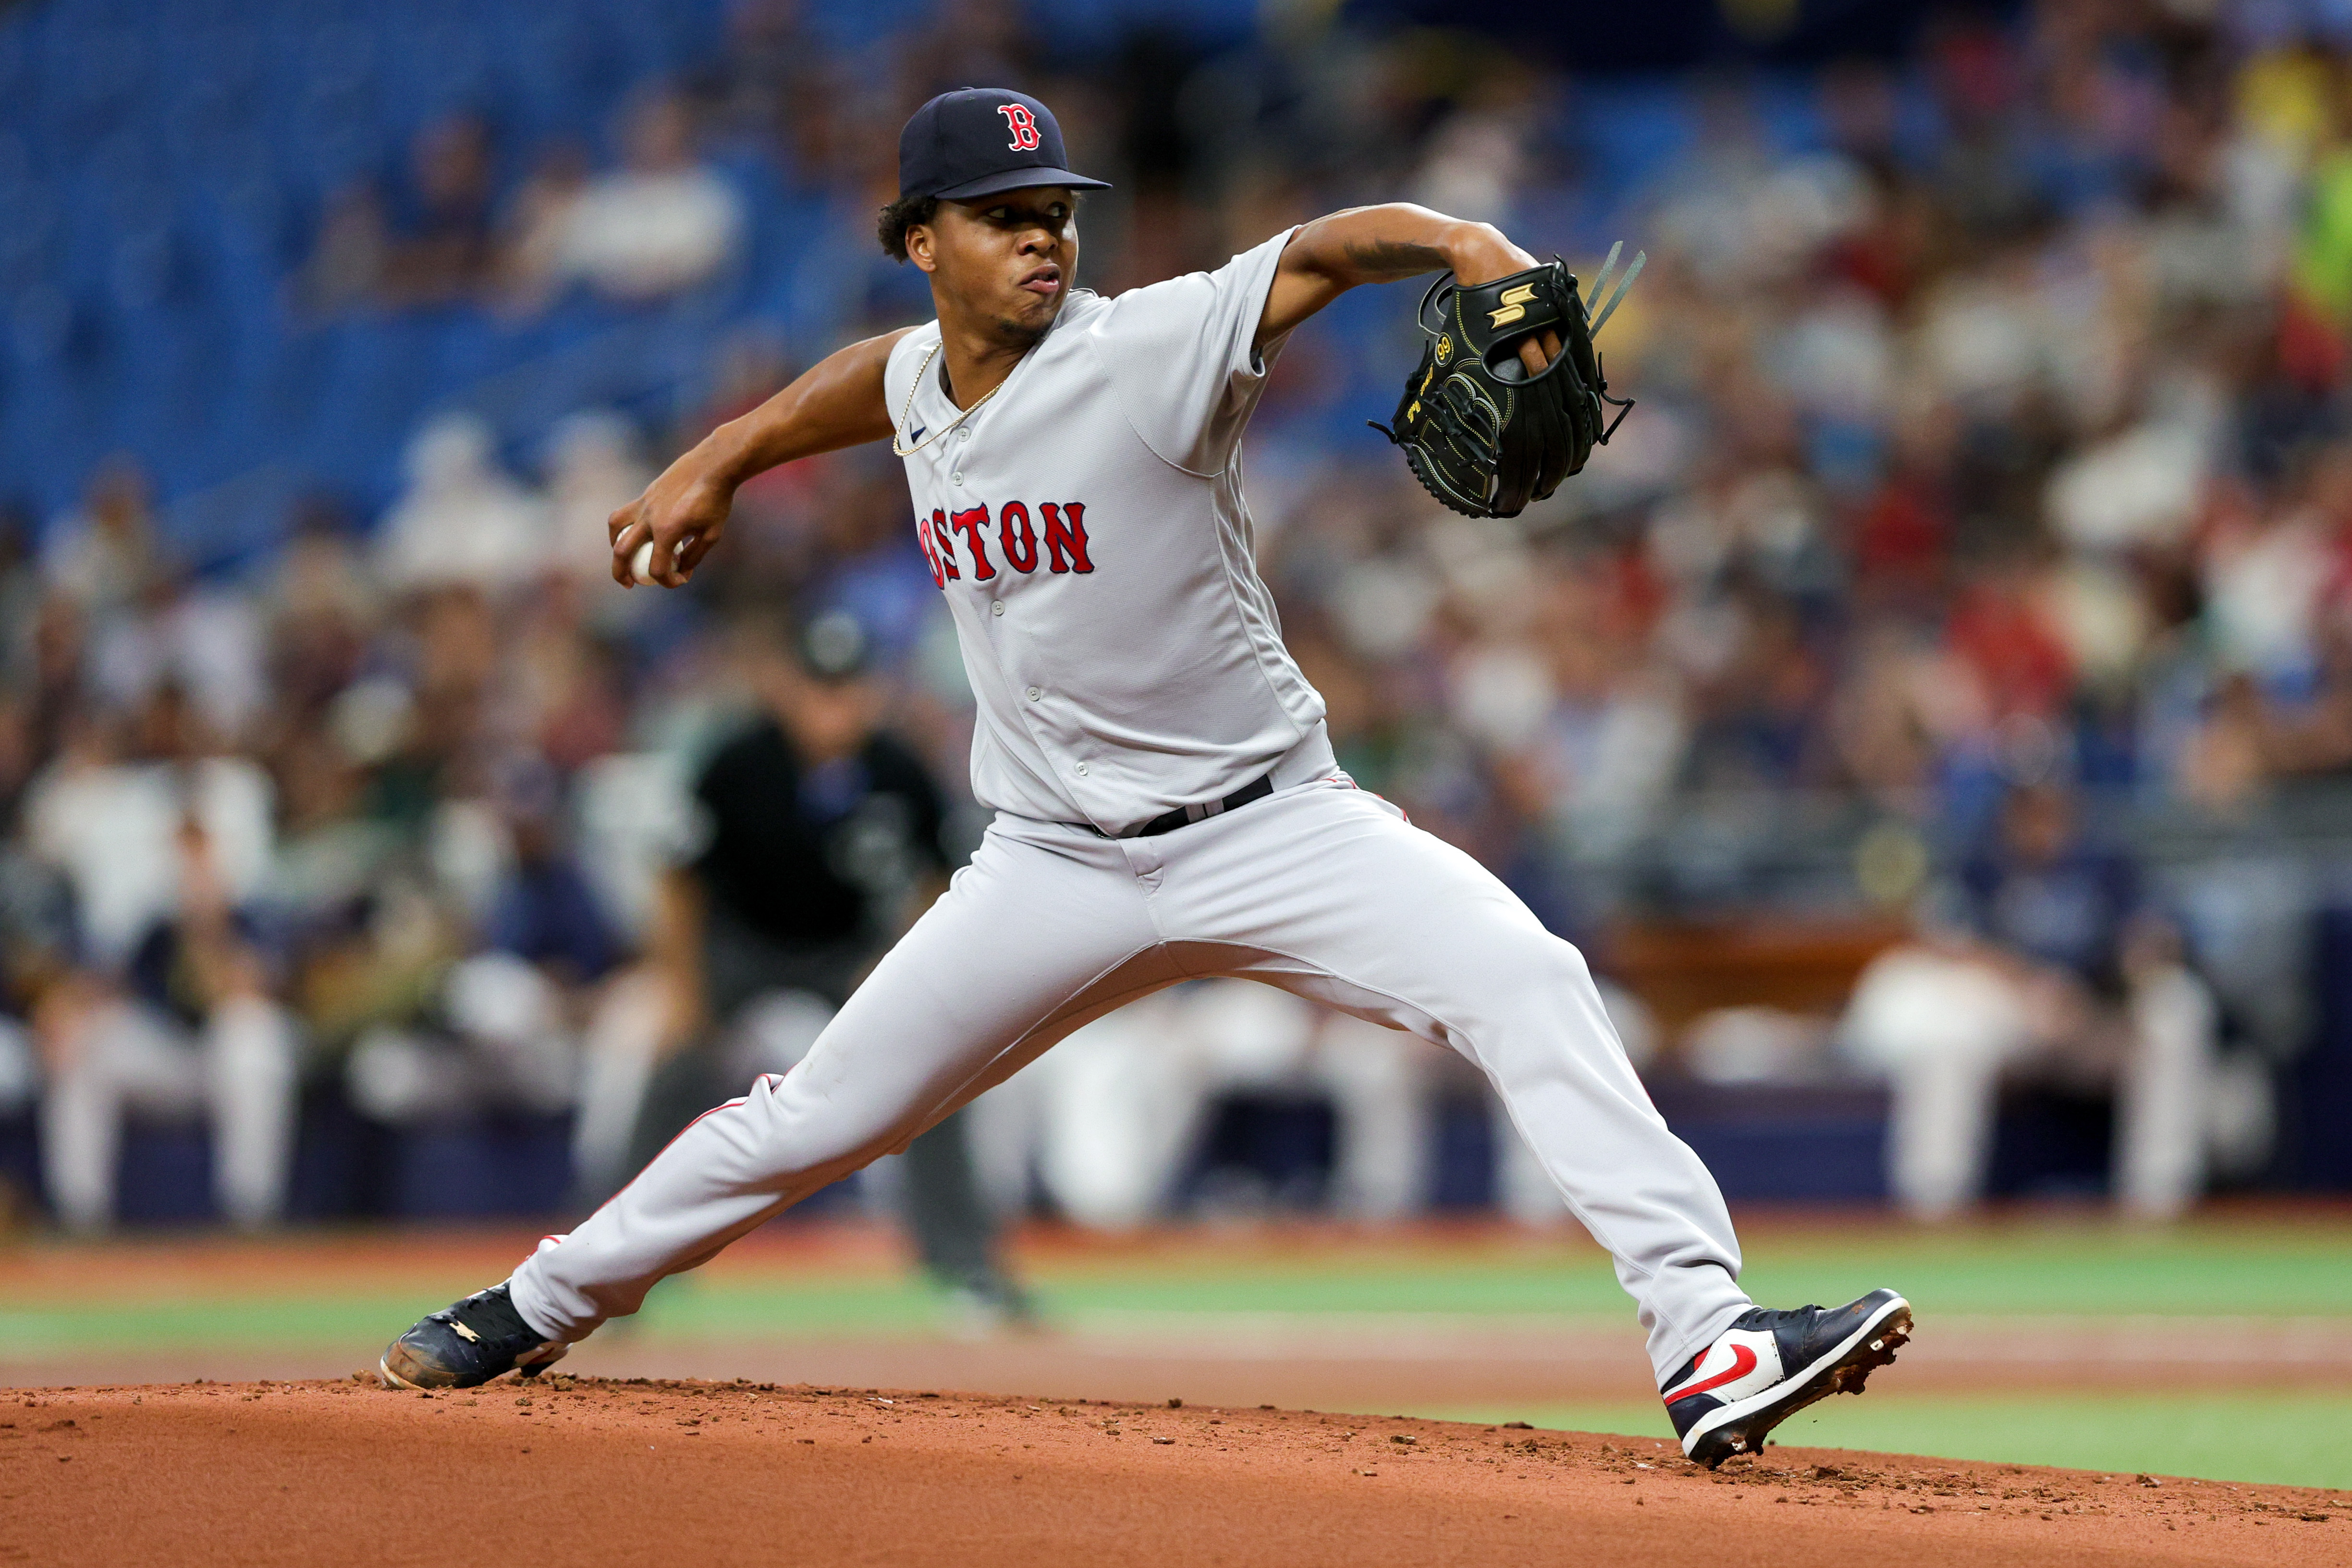 Boston Red Sox snap 5-game losing streak with 3-1 win over